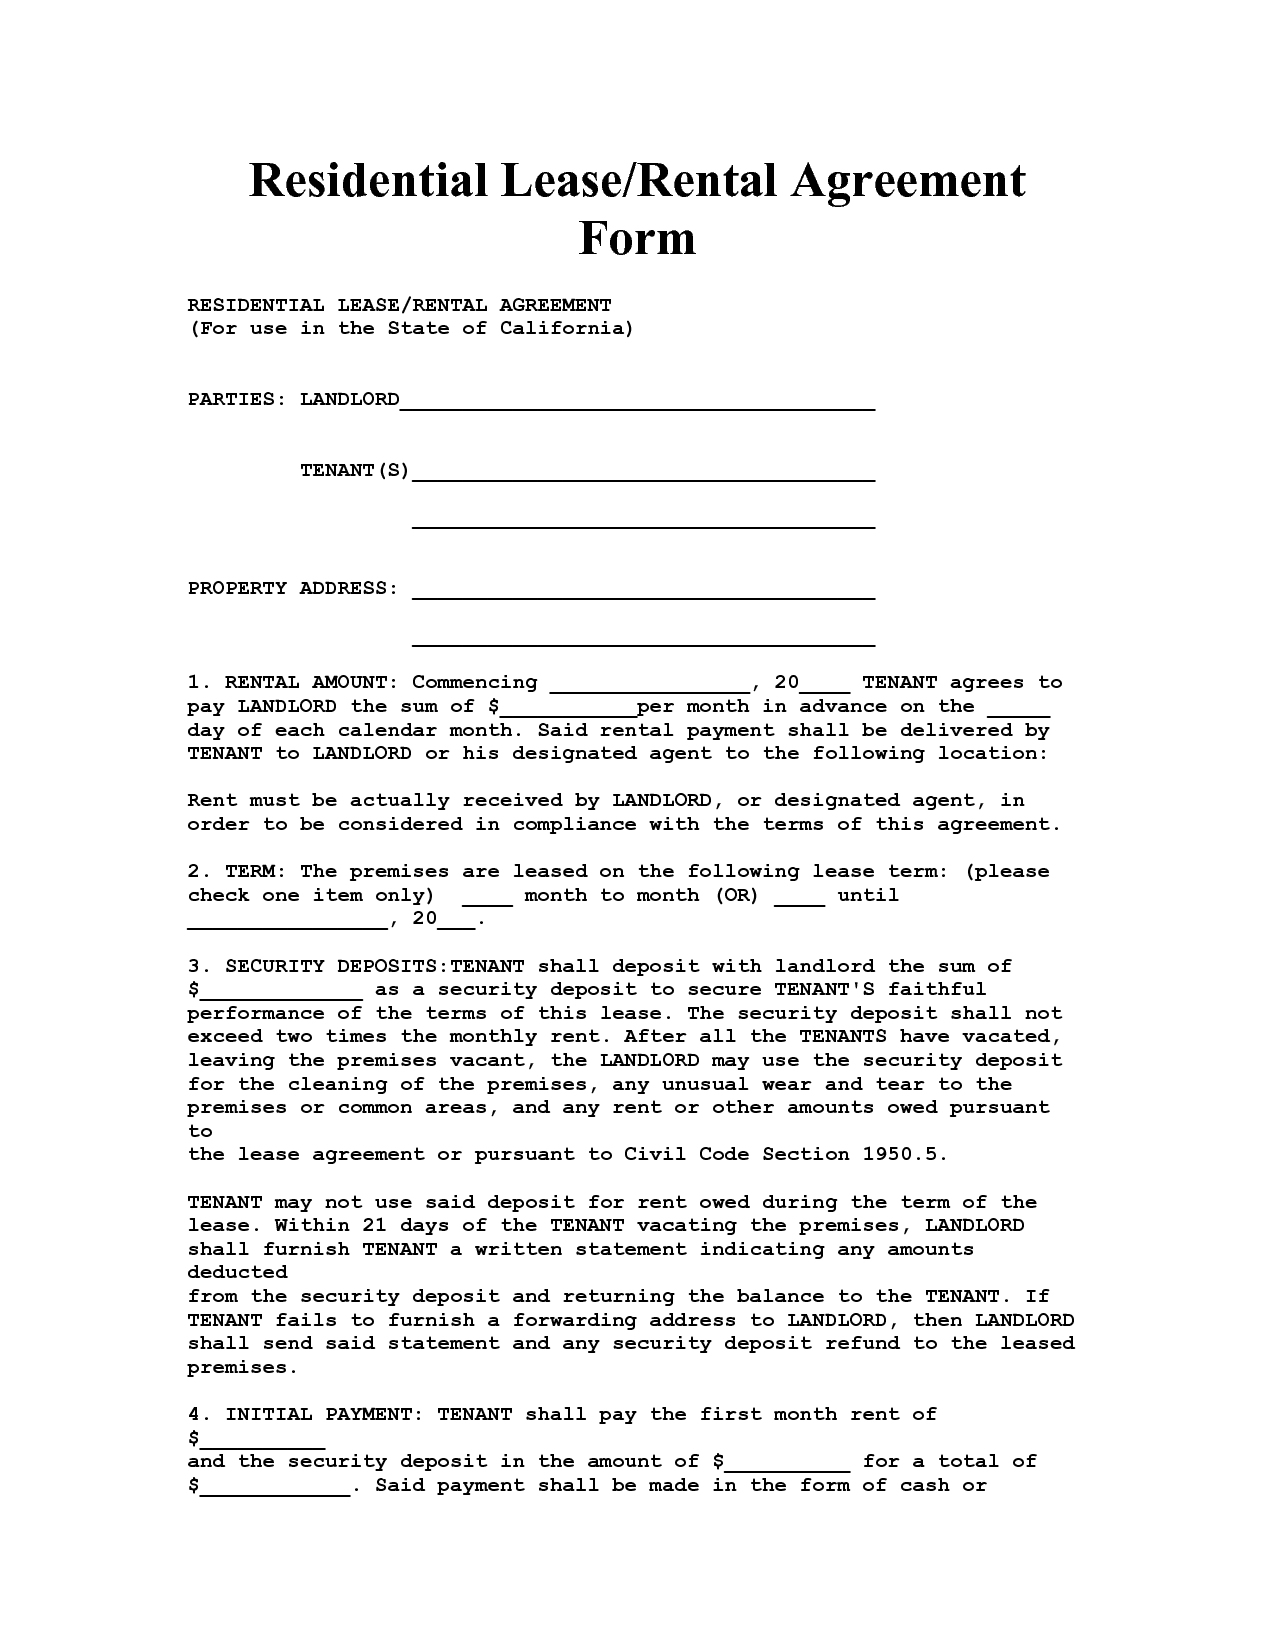 House Lease Agreement Ny Standard Rental Lease Agreement Ny 94 California House Lease